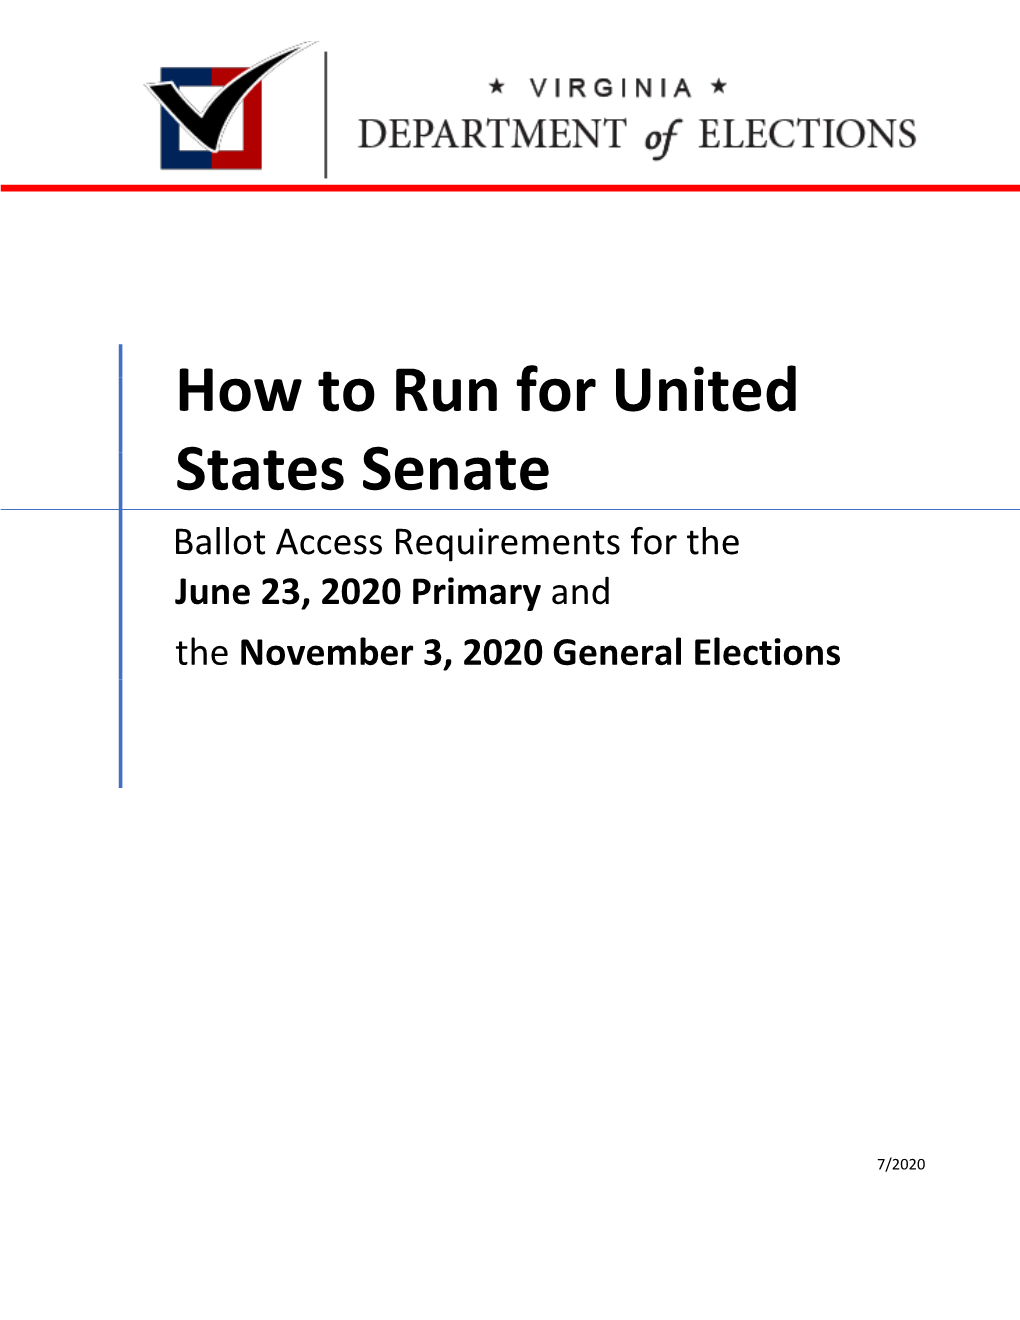 How to Run for United States Senate Ballot Access Requirements for the June 23, 2020 Primary and the November 3, 2020 General Elections